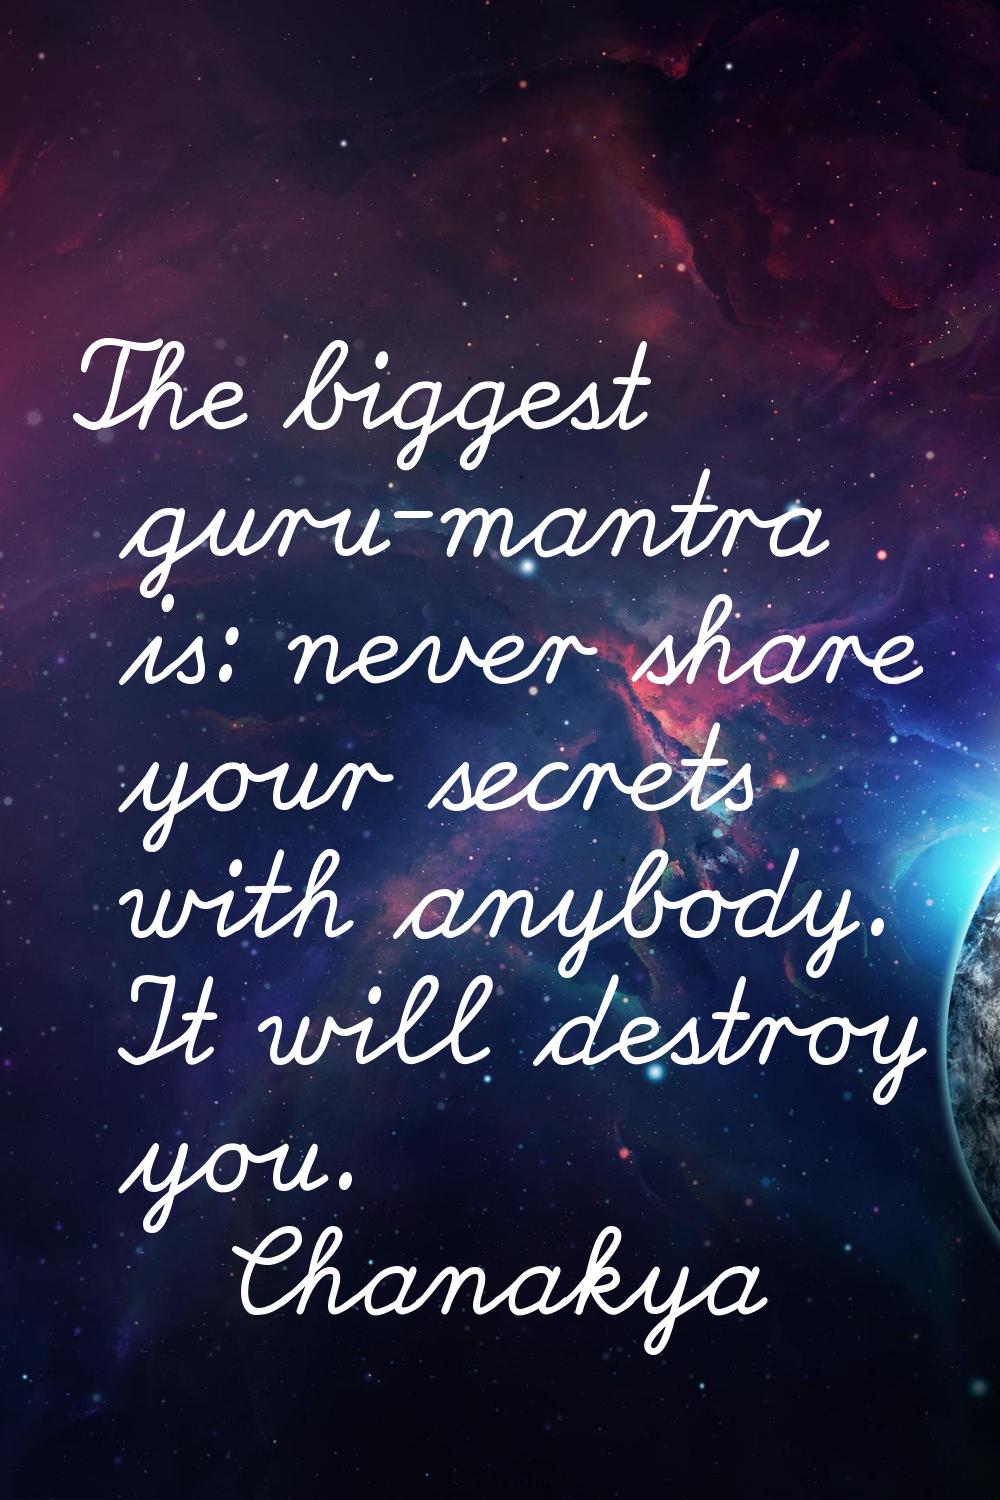 The biggest guru-mantra is: never share your secrets with anybody. It will destroy you.